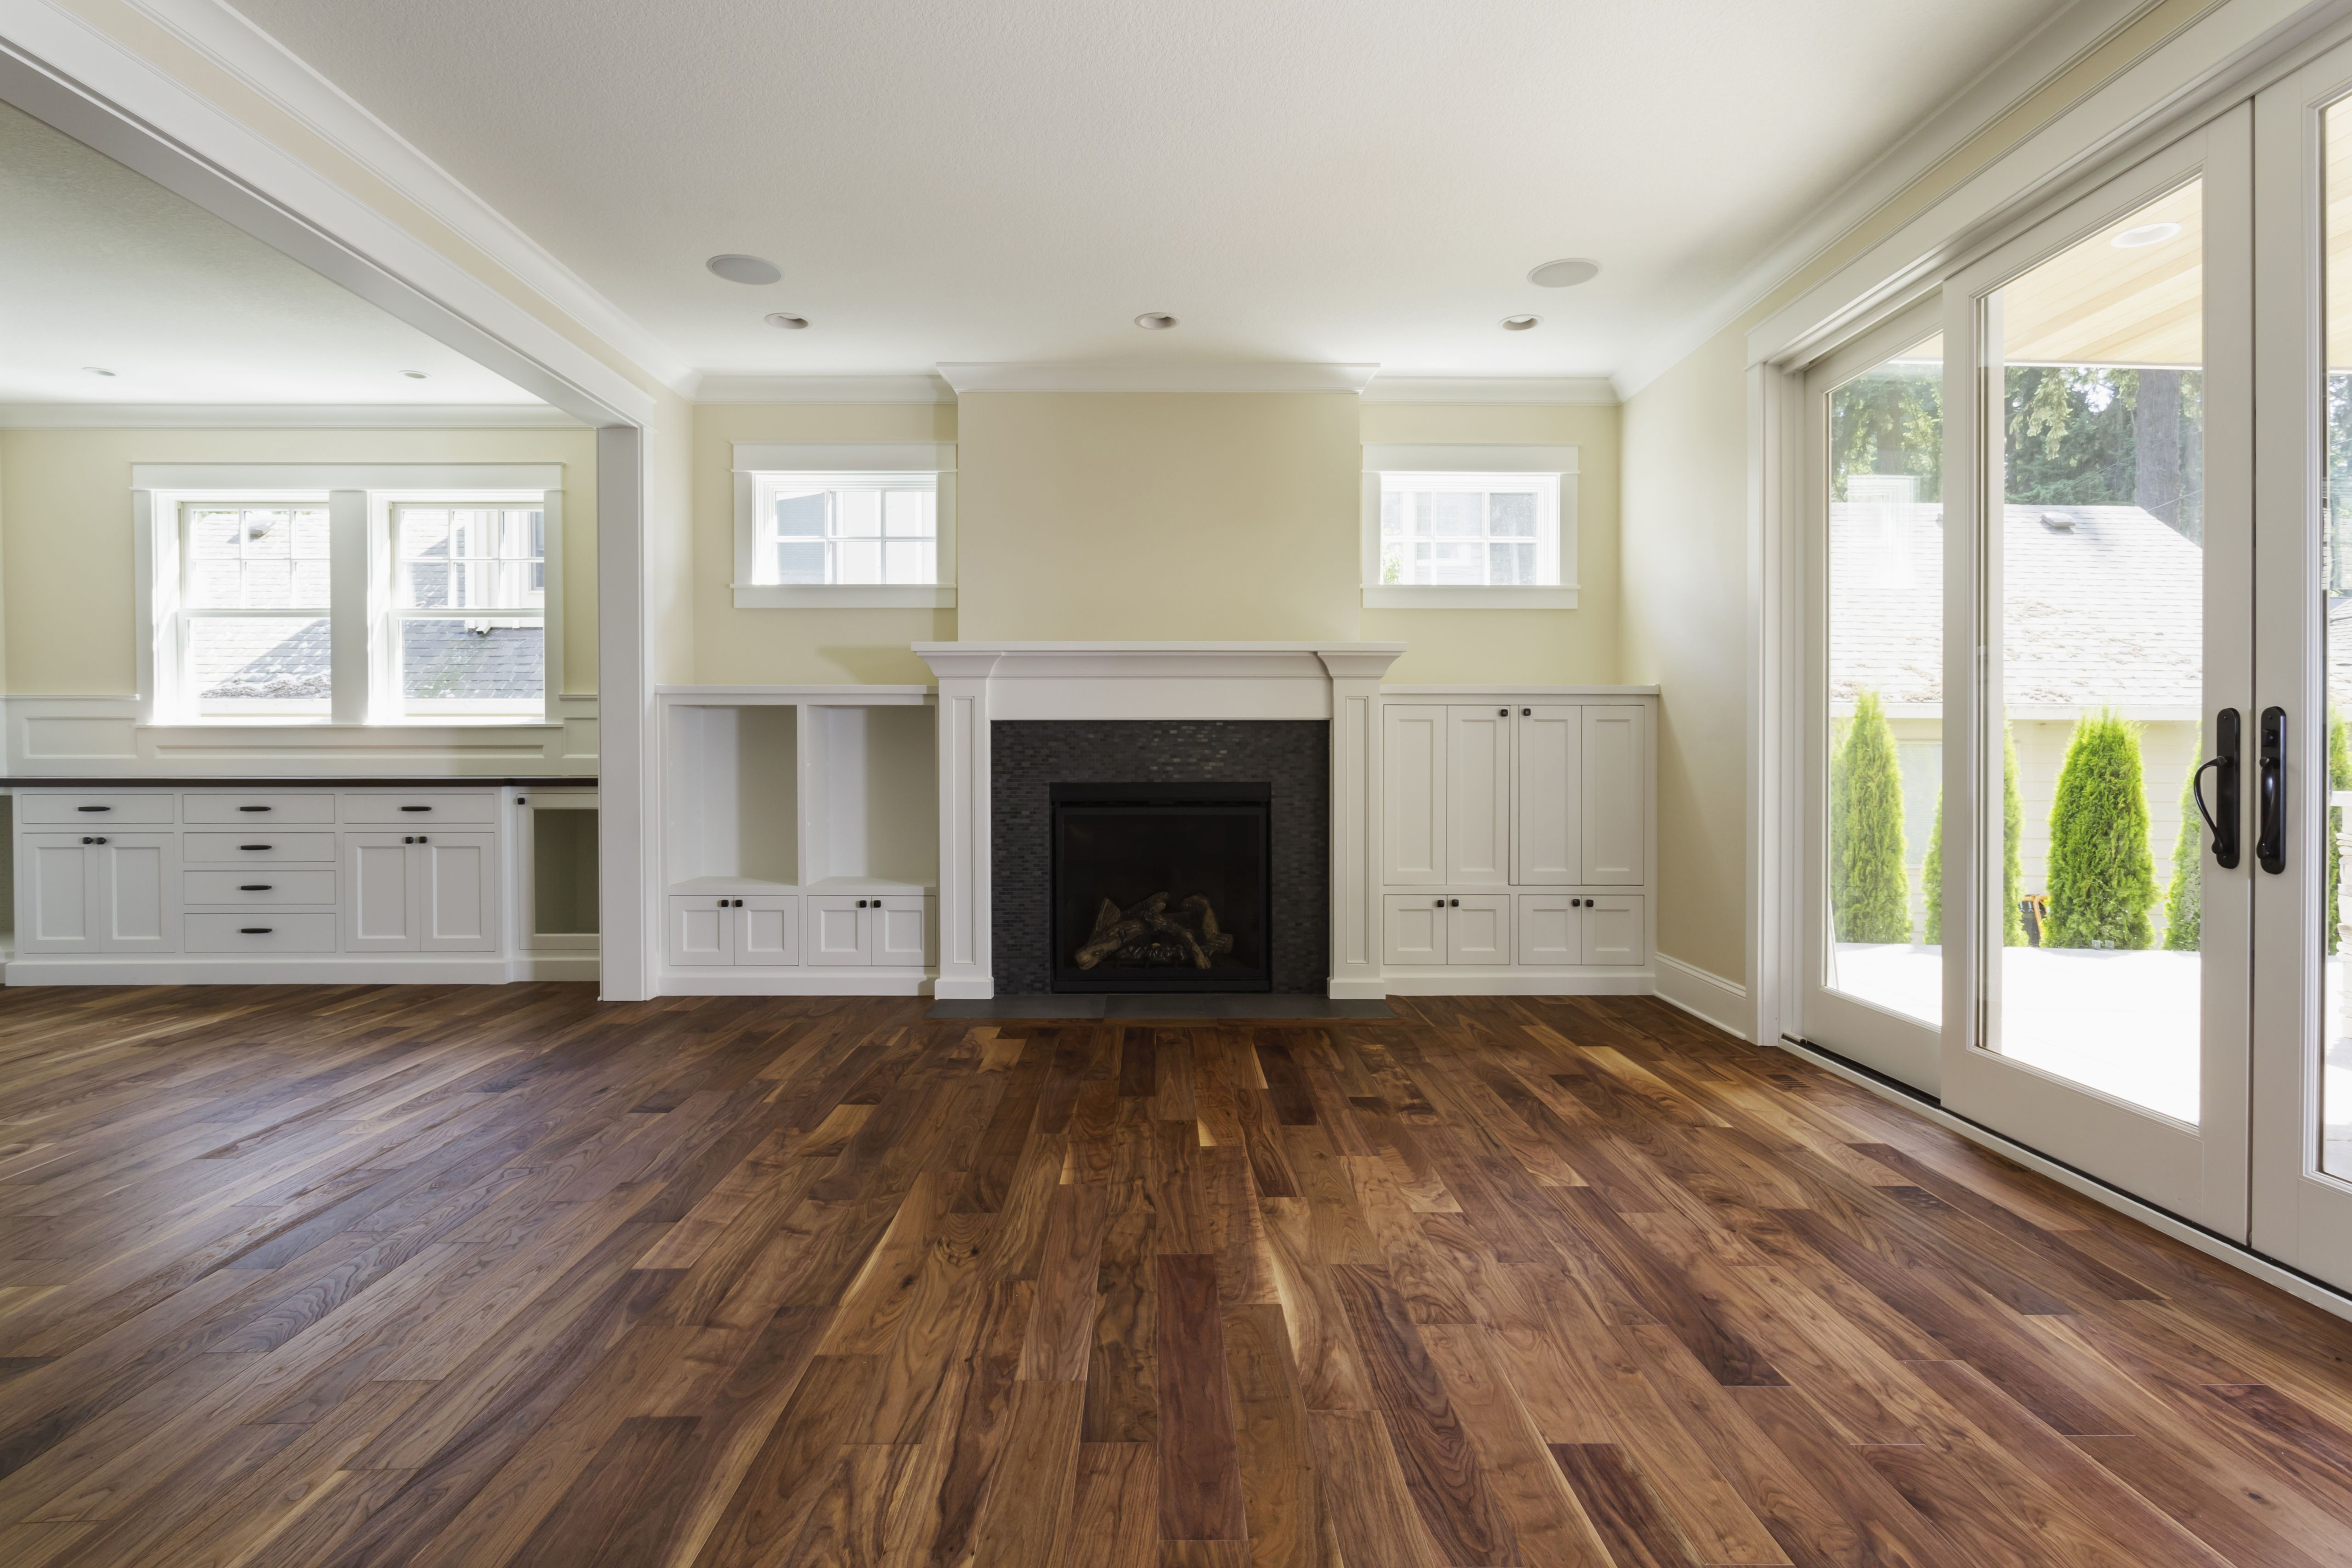 23 Lovely Hardwood Floor Repair Estimate 2024 free download hardwood floor repair estimate of the pros and cons of prefinished hardwood flooring within fireplace and built in shelves in living room 482143011 57bef8e33df78cc16e035397